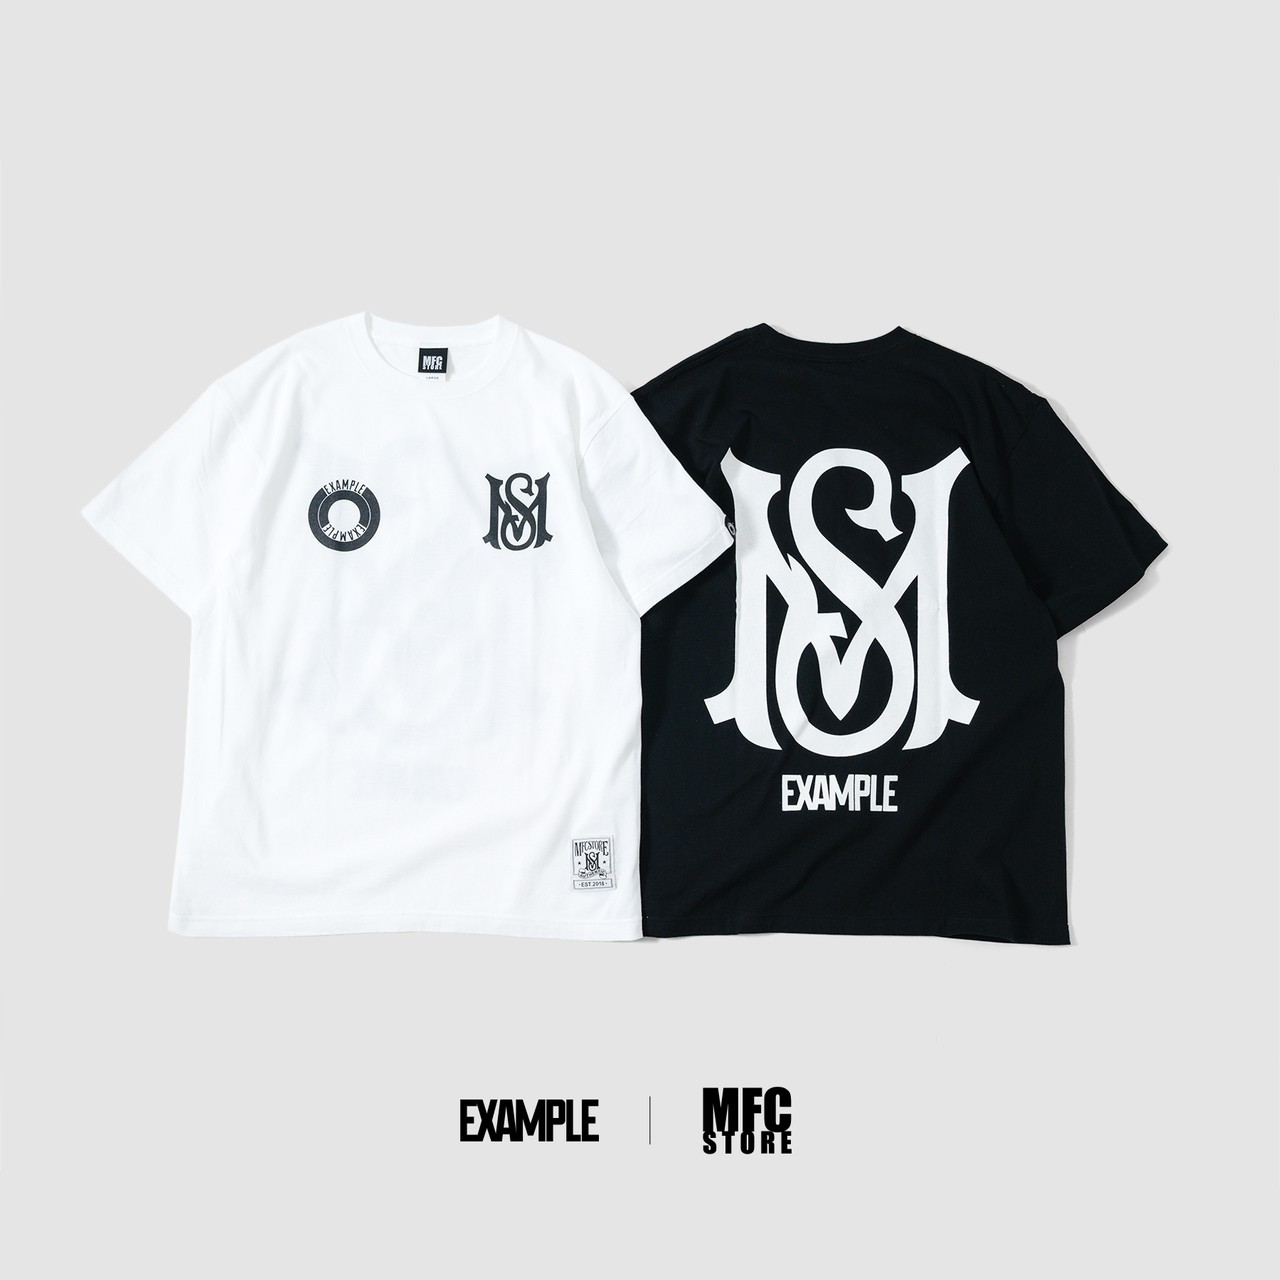 EXAMPLE x MFC STORE